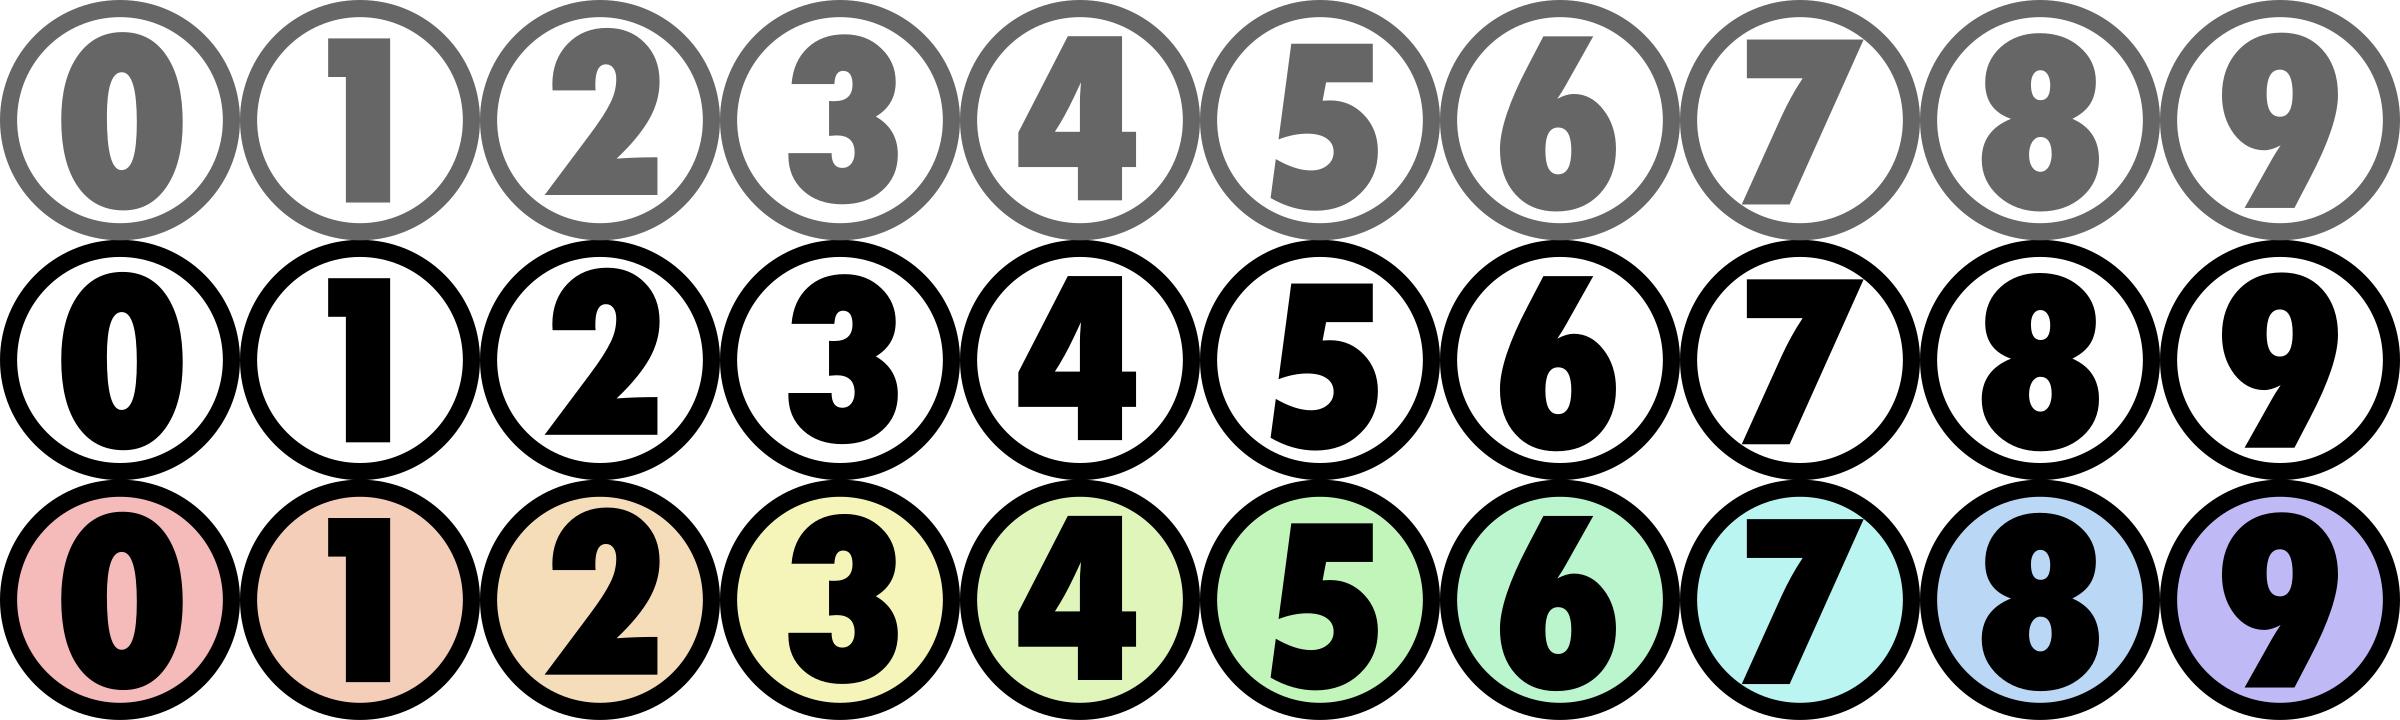 Number icons for CSS slicing png